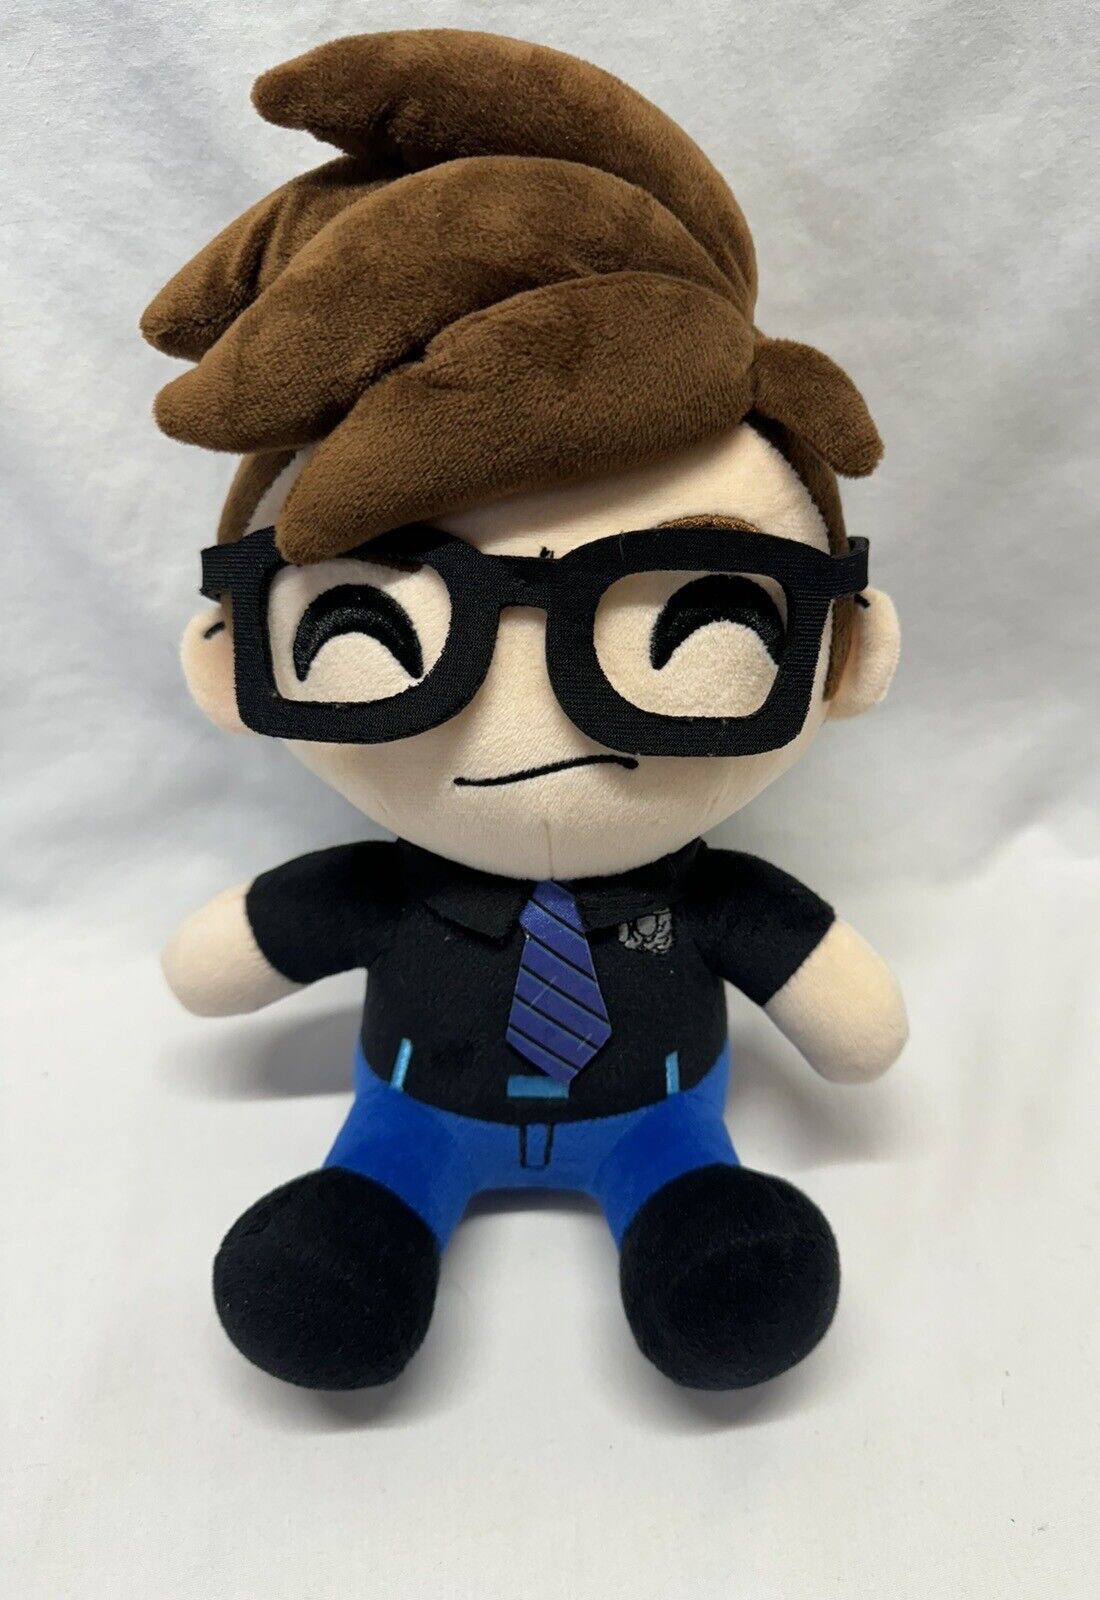 VERY RARE Logan Sanders Youtooz (9in) Plush Doll Limited Edition Collectible